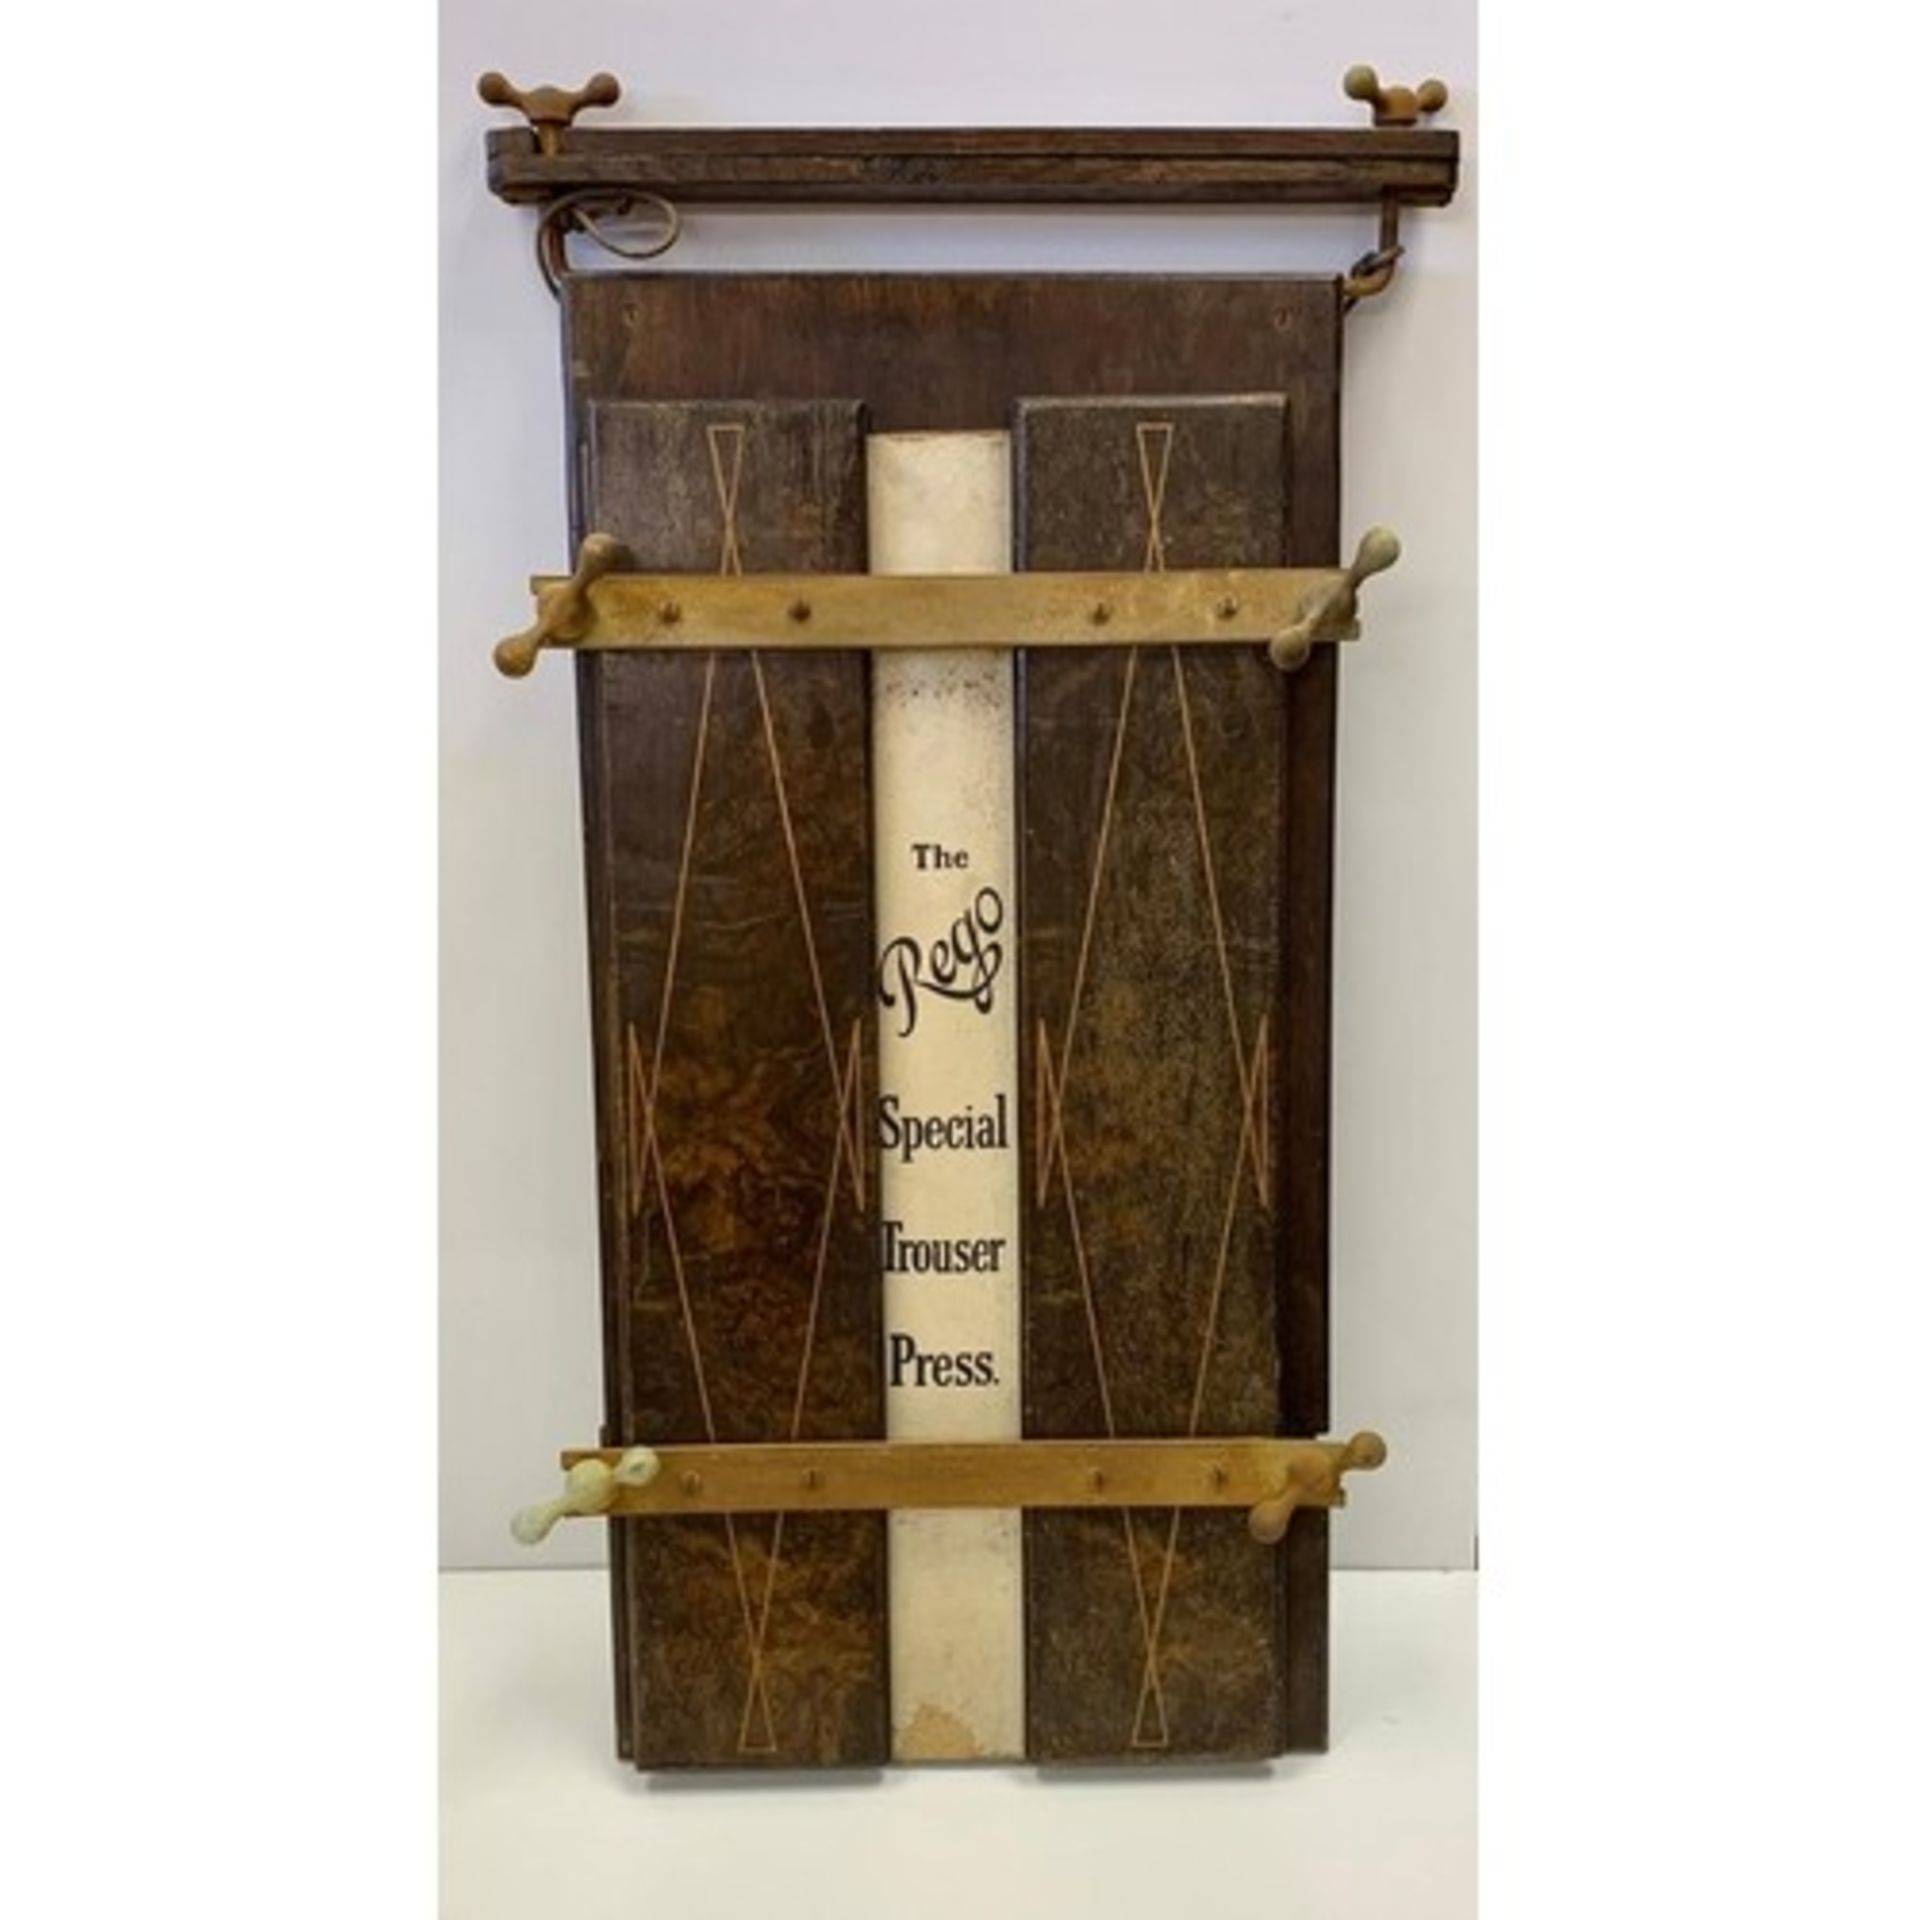 Victorian style antique trouser press wood and metal frame with white leather. Inscription on back